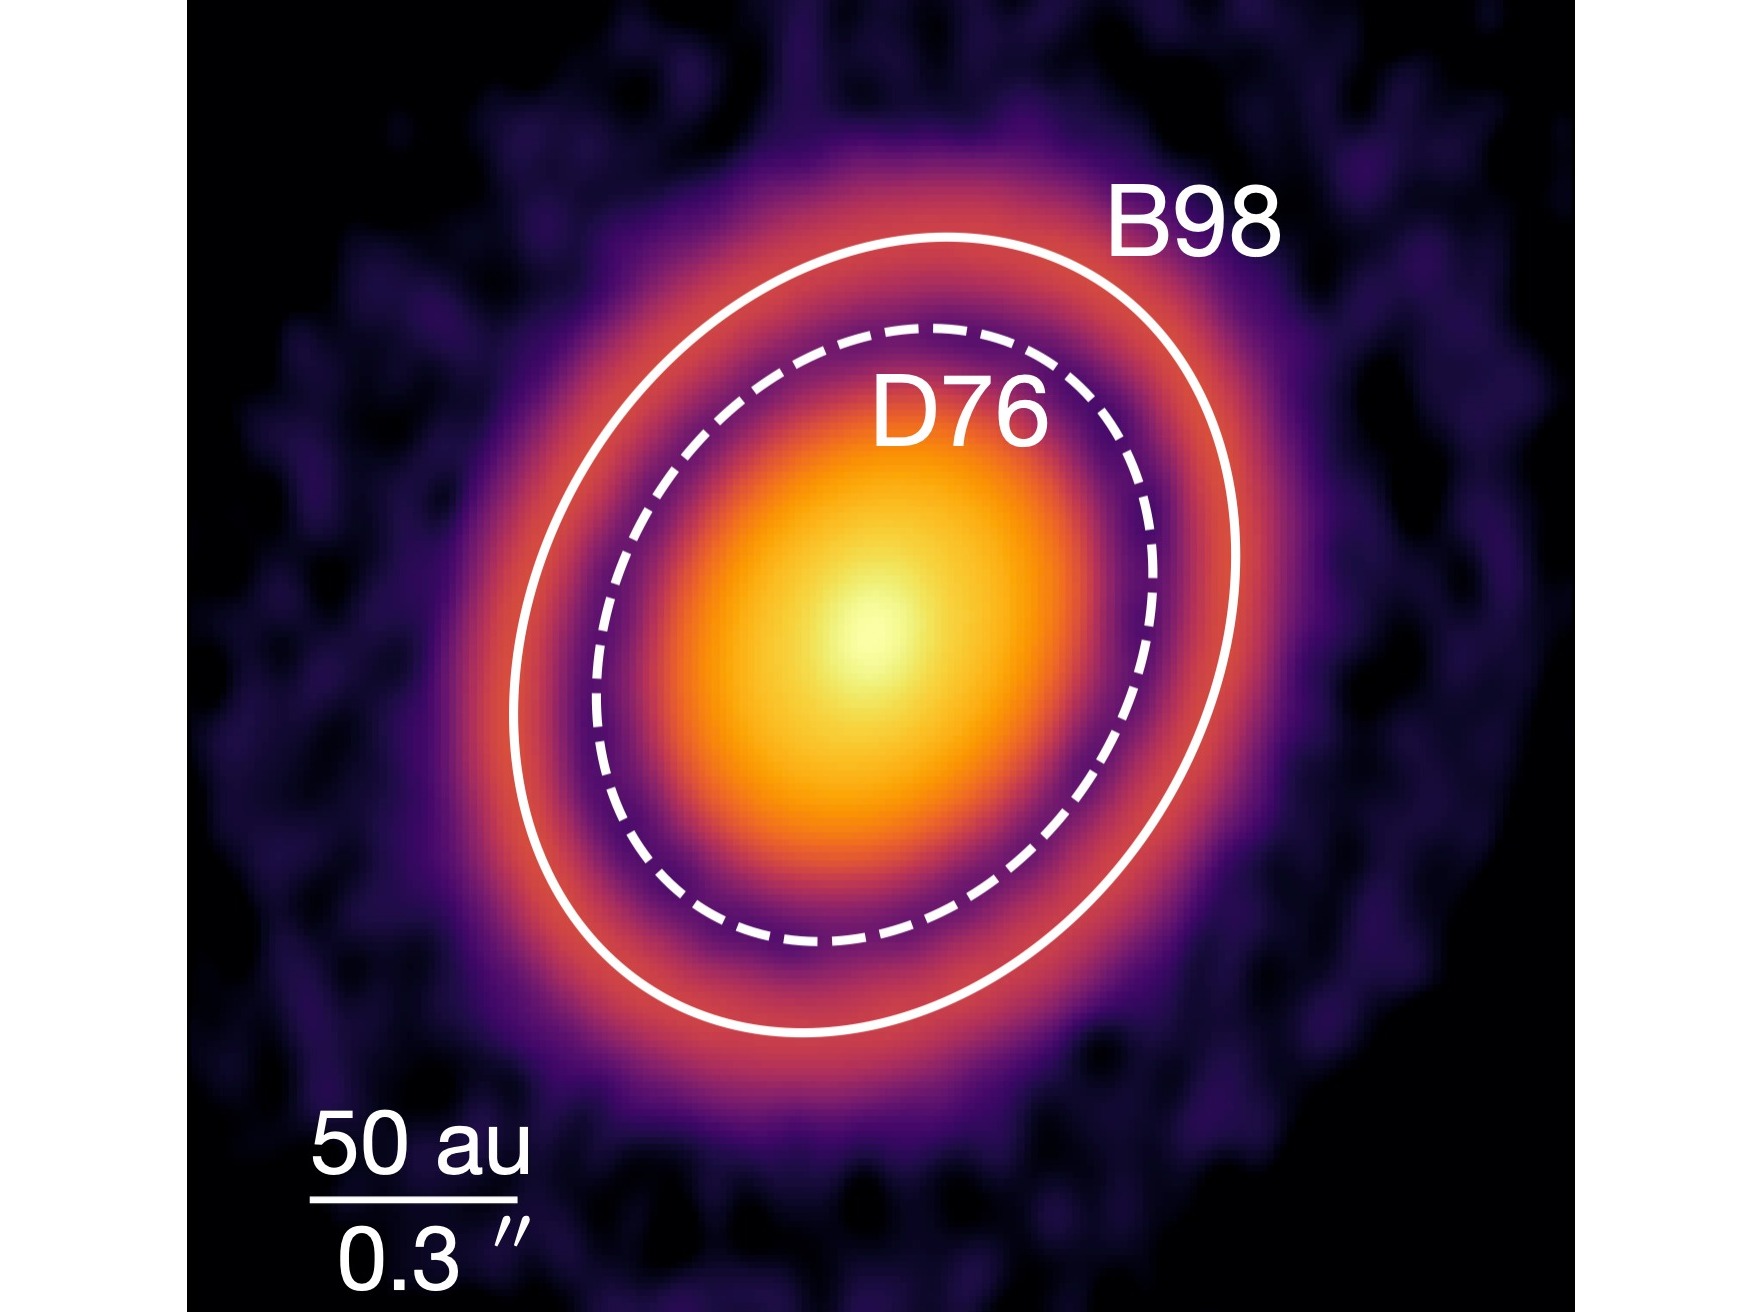 Accreting Planets Leave Chemical Footprints in Protoplanetary Disks